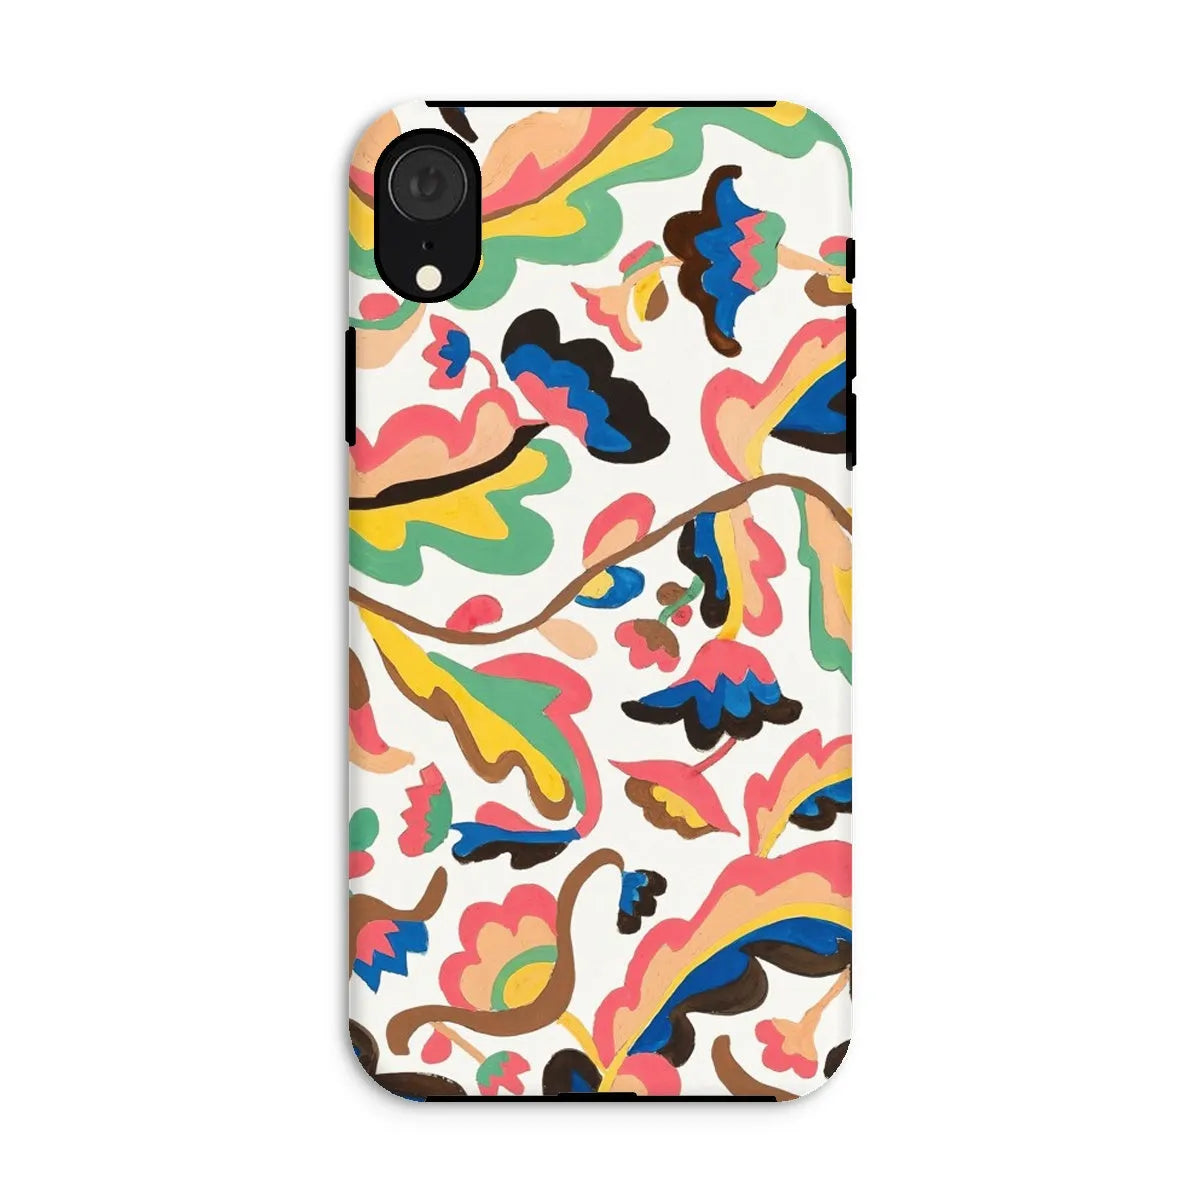 Colcha Floral Aesthetic Pattern Phone Case - Etna Wiswall - Iphone Xr / Matte - Mobile Phone Cases - Aesthetic Art